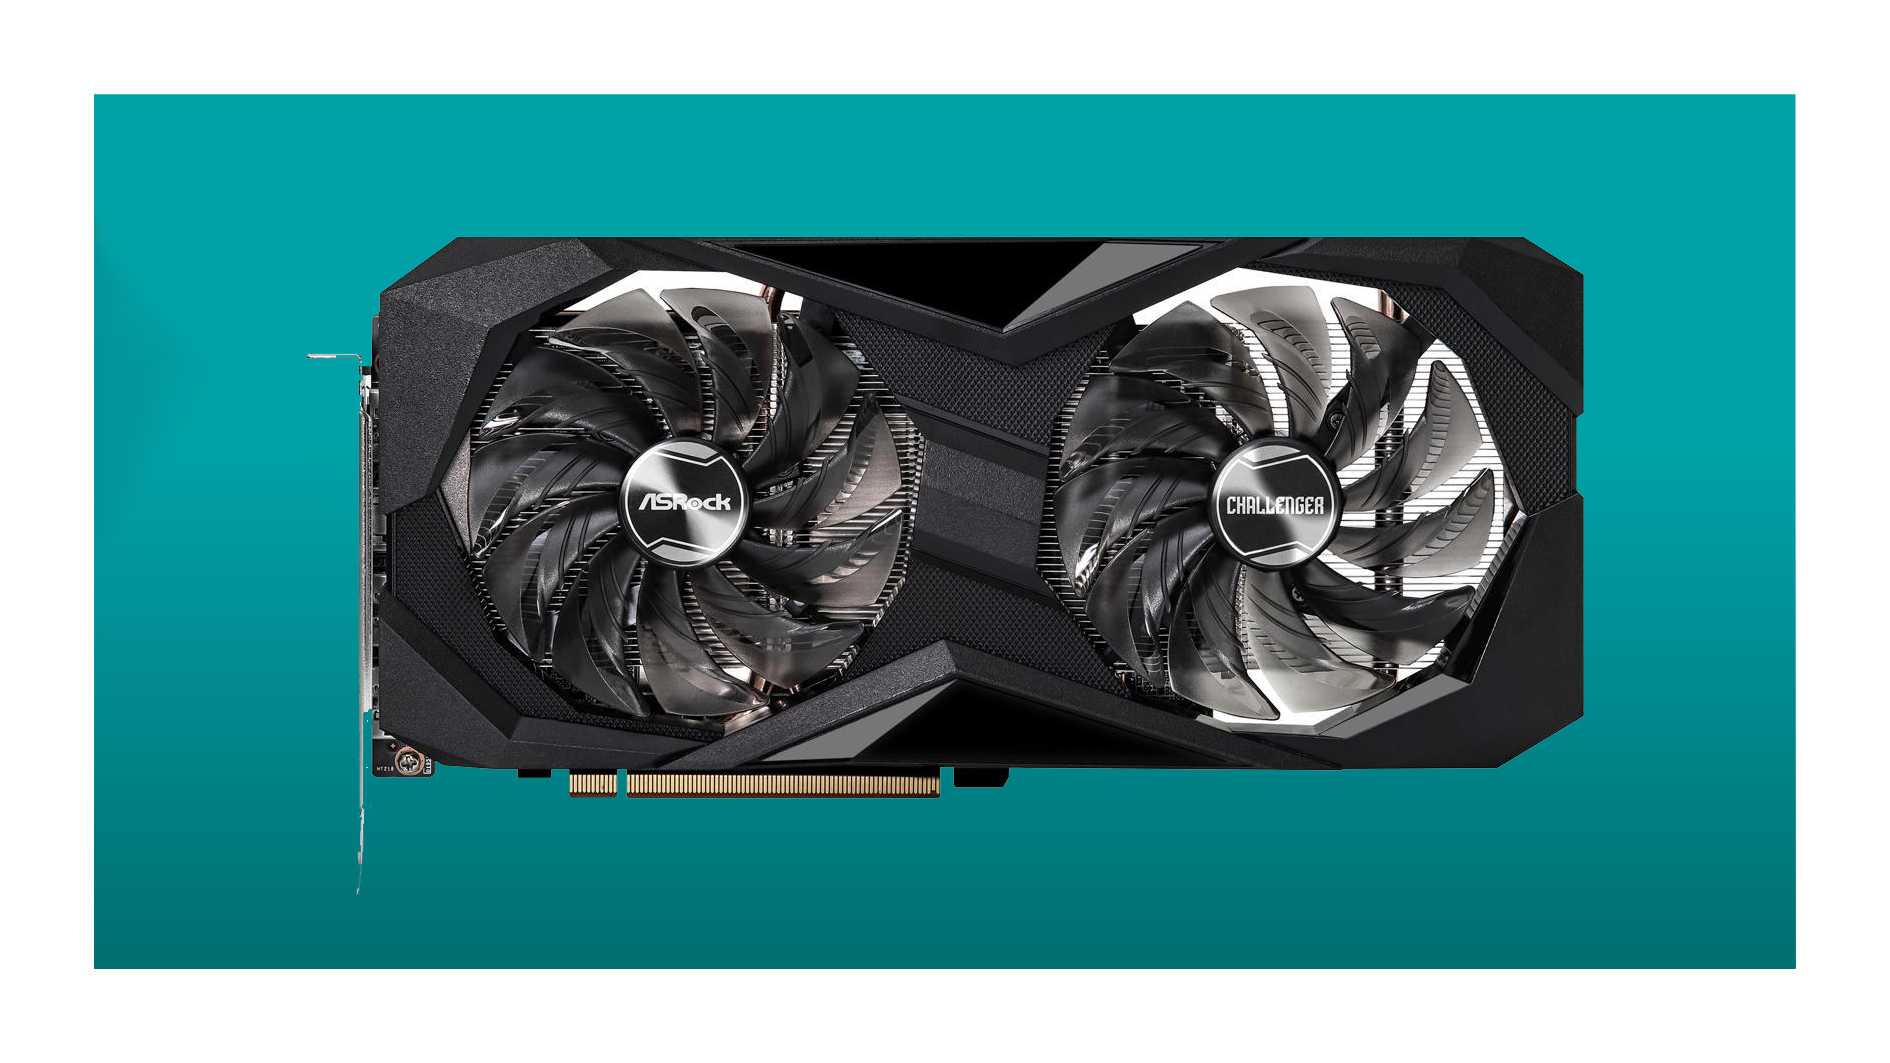 This Radeon RX 6600 XT is a great budget option for $100 under 